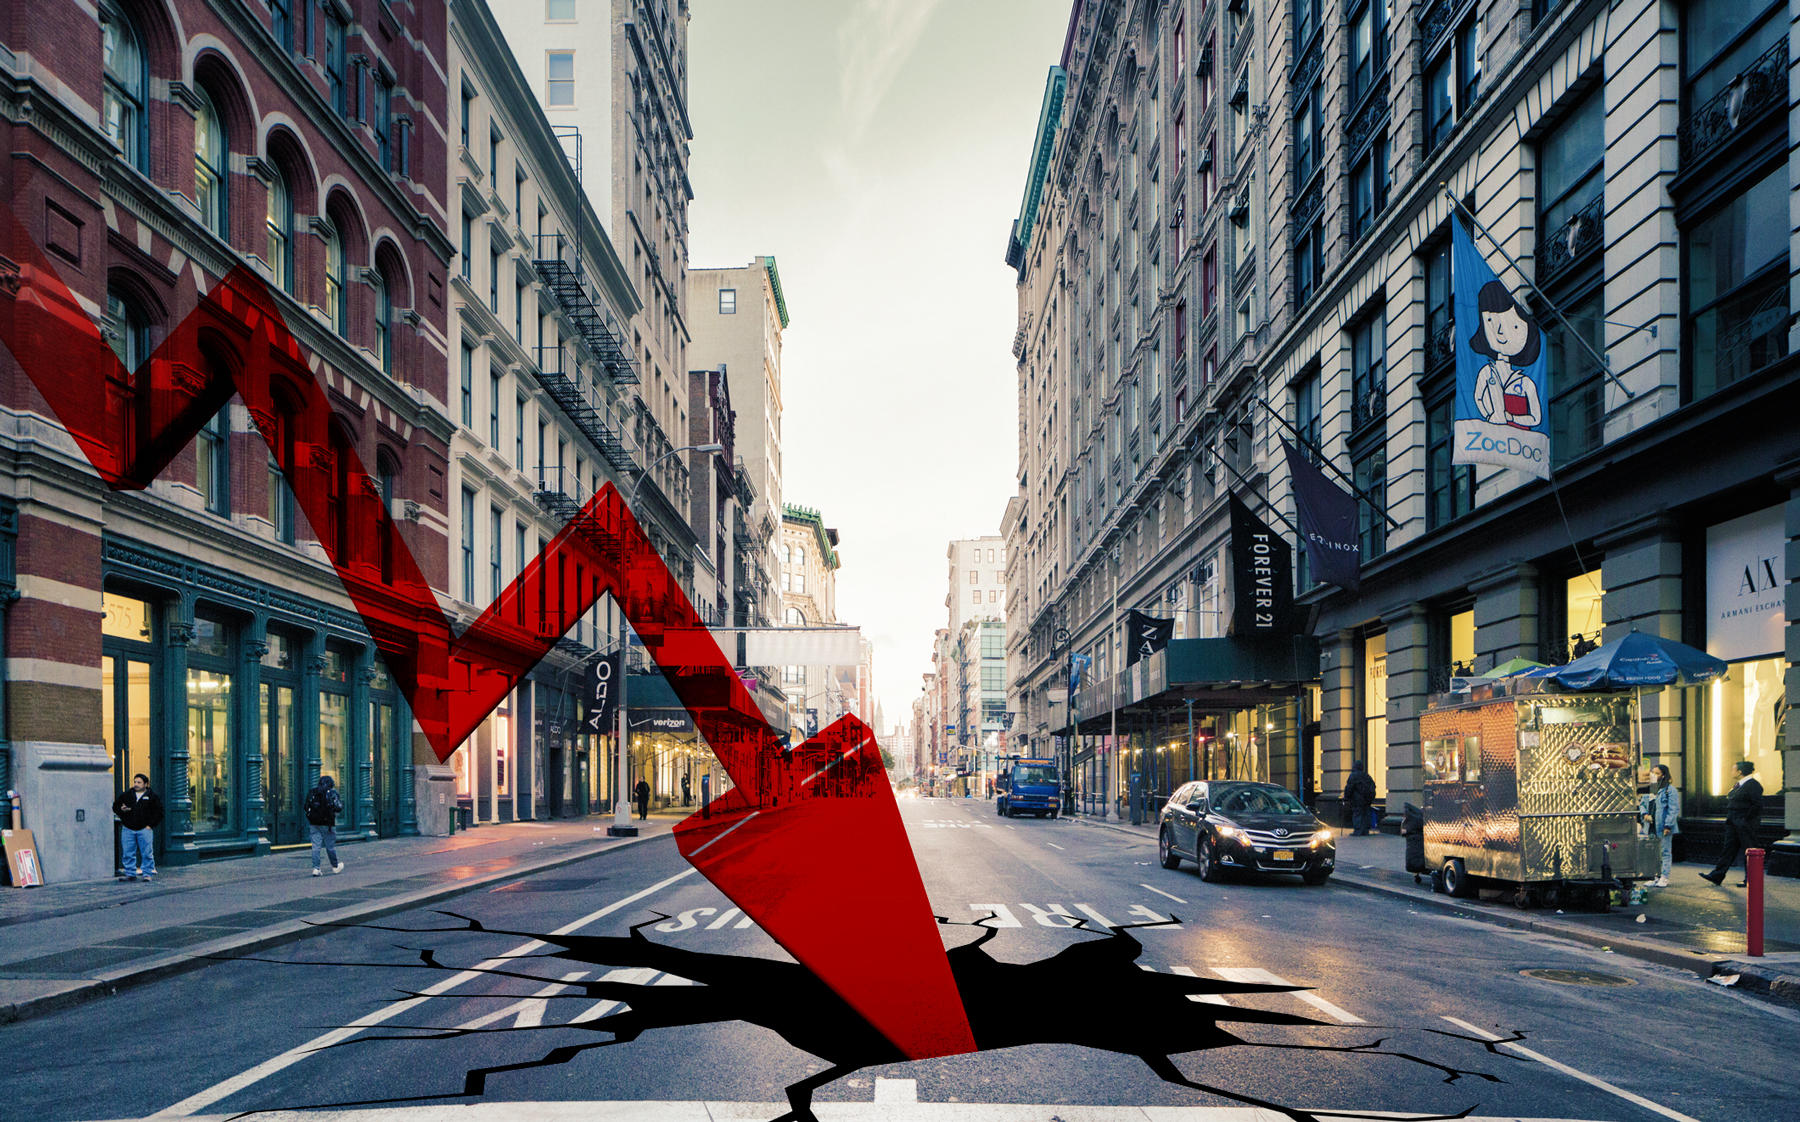 Manhattan’s housing market saw a sharp drop in new inventory and activity during the second week of April 2020. (Credit: iStock)